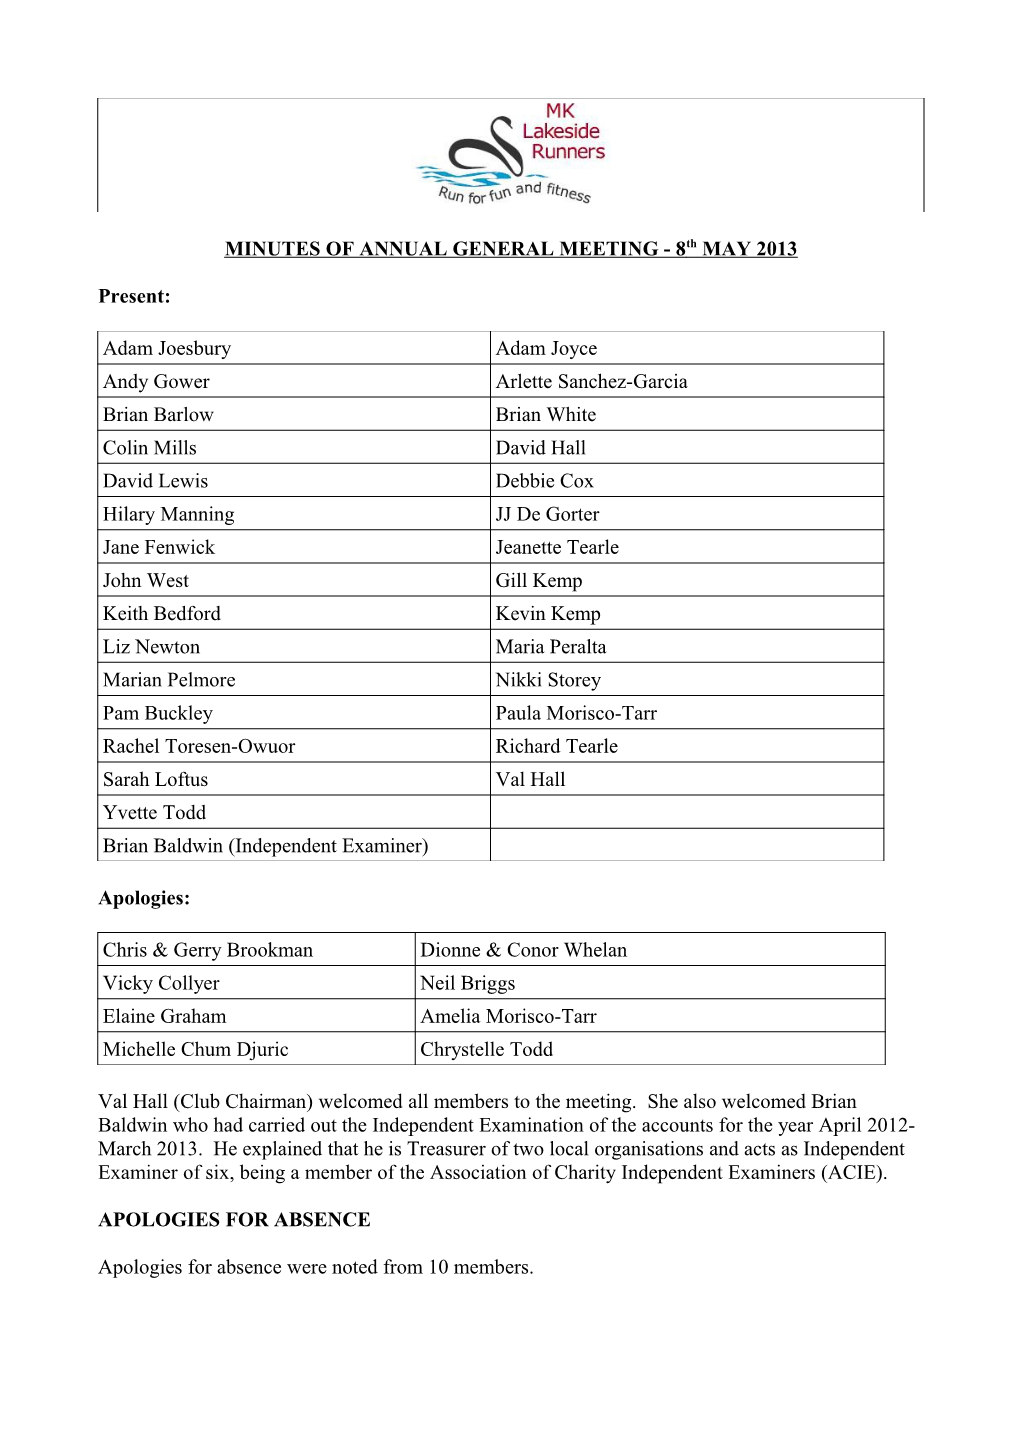 MINUTES of ANNUAL GENERAL MEETING - 8Th MAY 2013